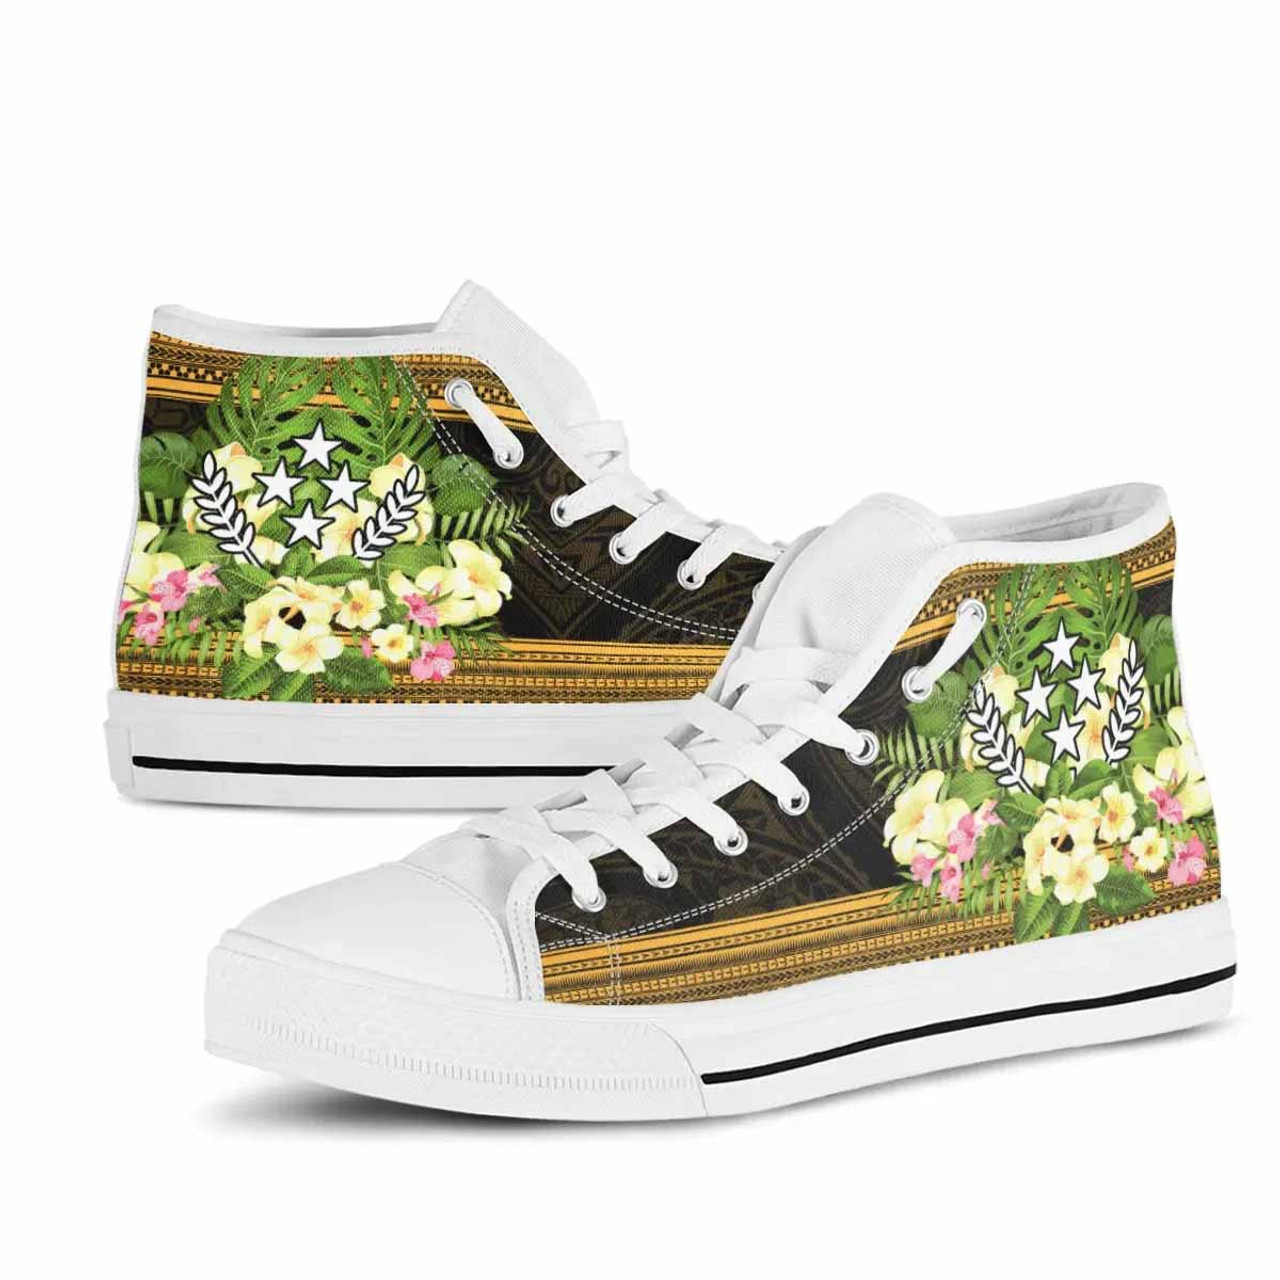 Kosrae State High Top Shoes - Polynesian Gold Patterns Collection 10